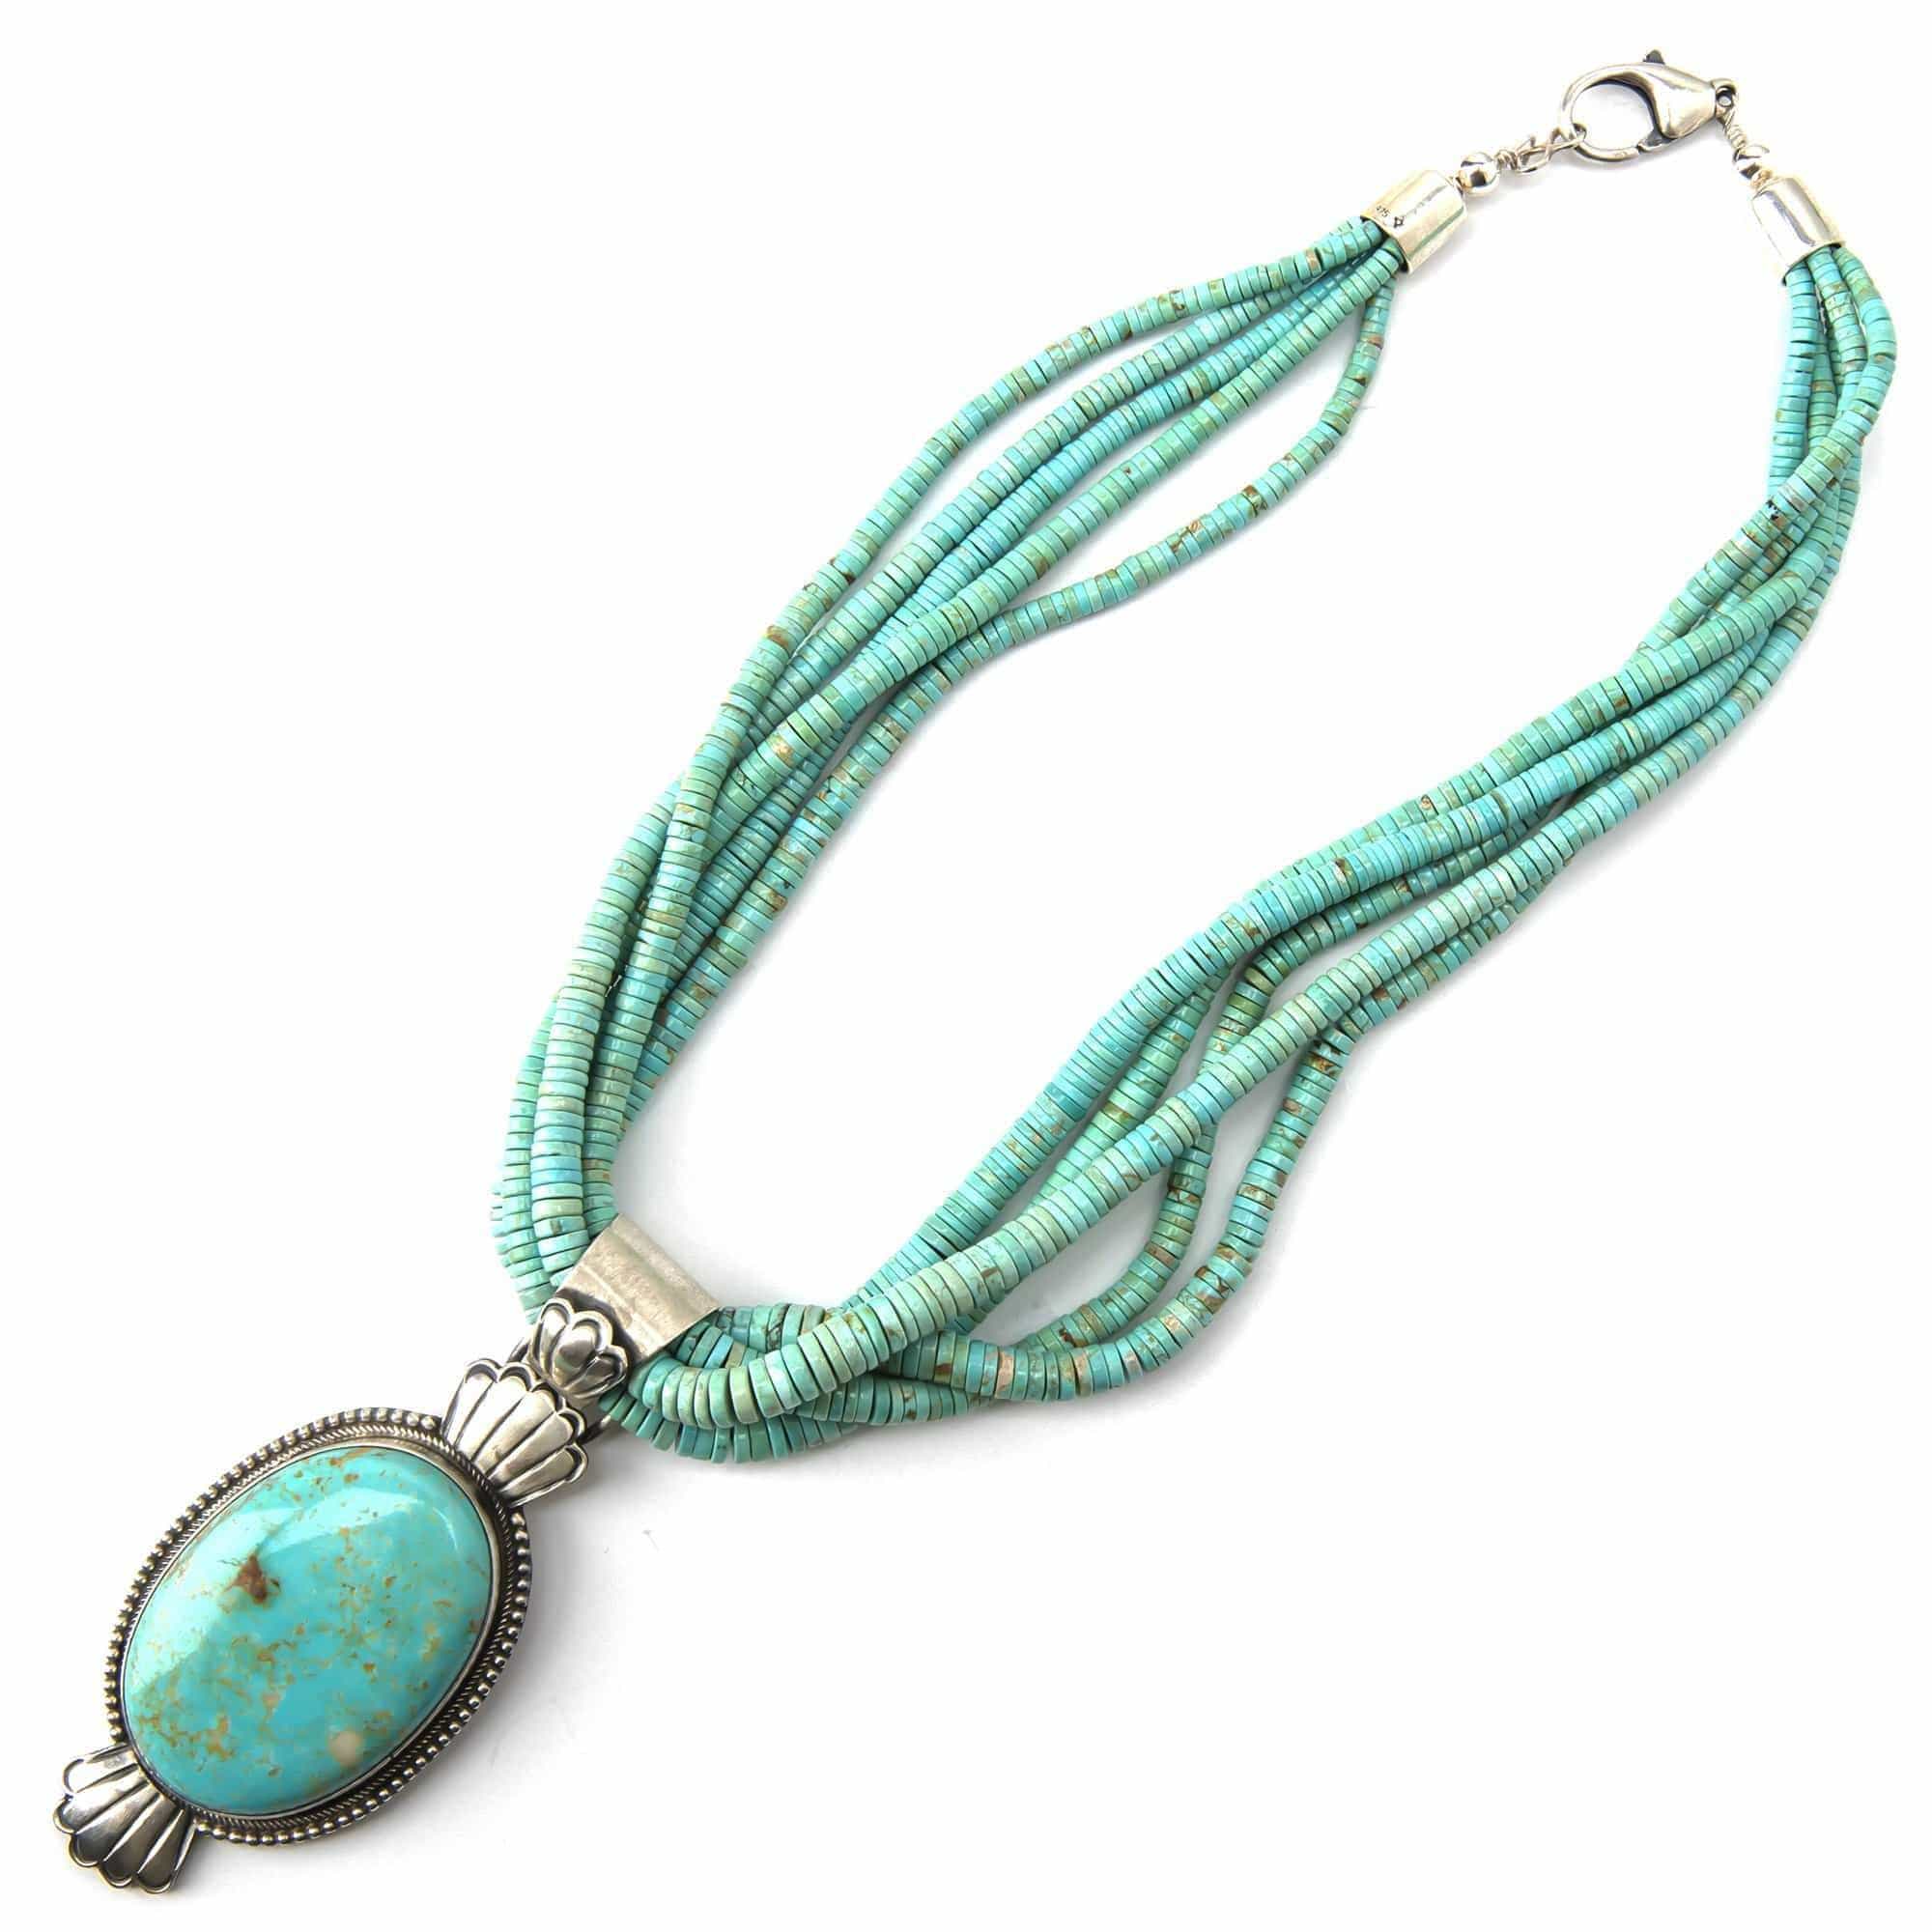 Kalifano Native American Jewelry Five Strand Tyrone Turquoise Native American Made 925 Sterling Silver Necklace NAN4800.001